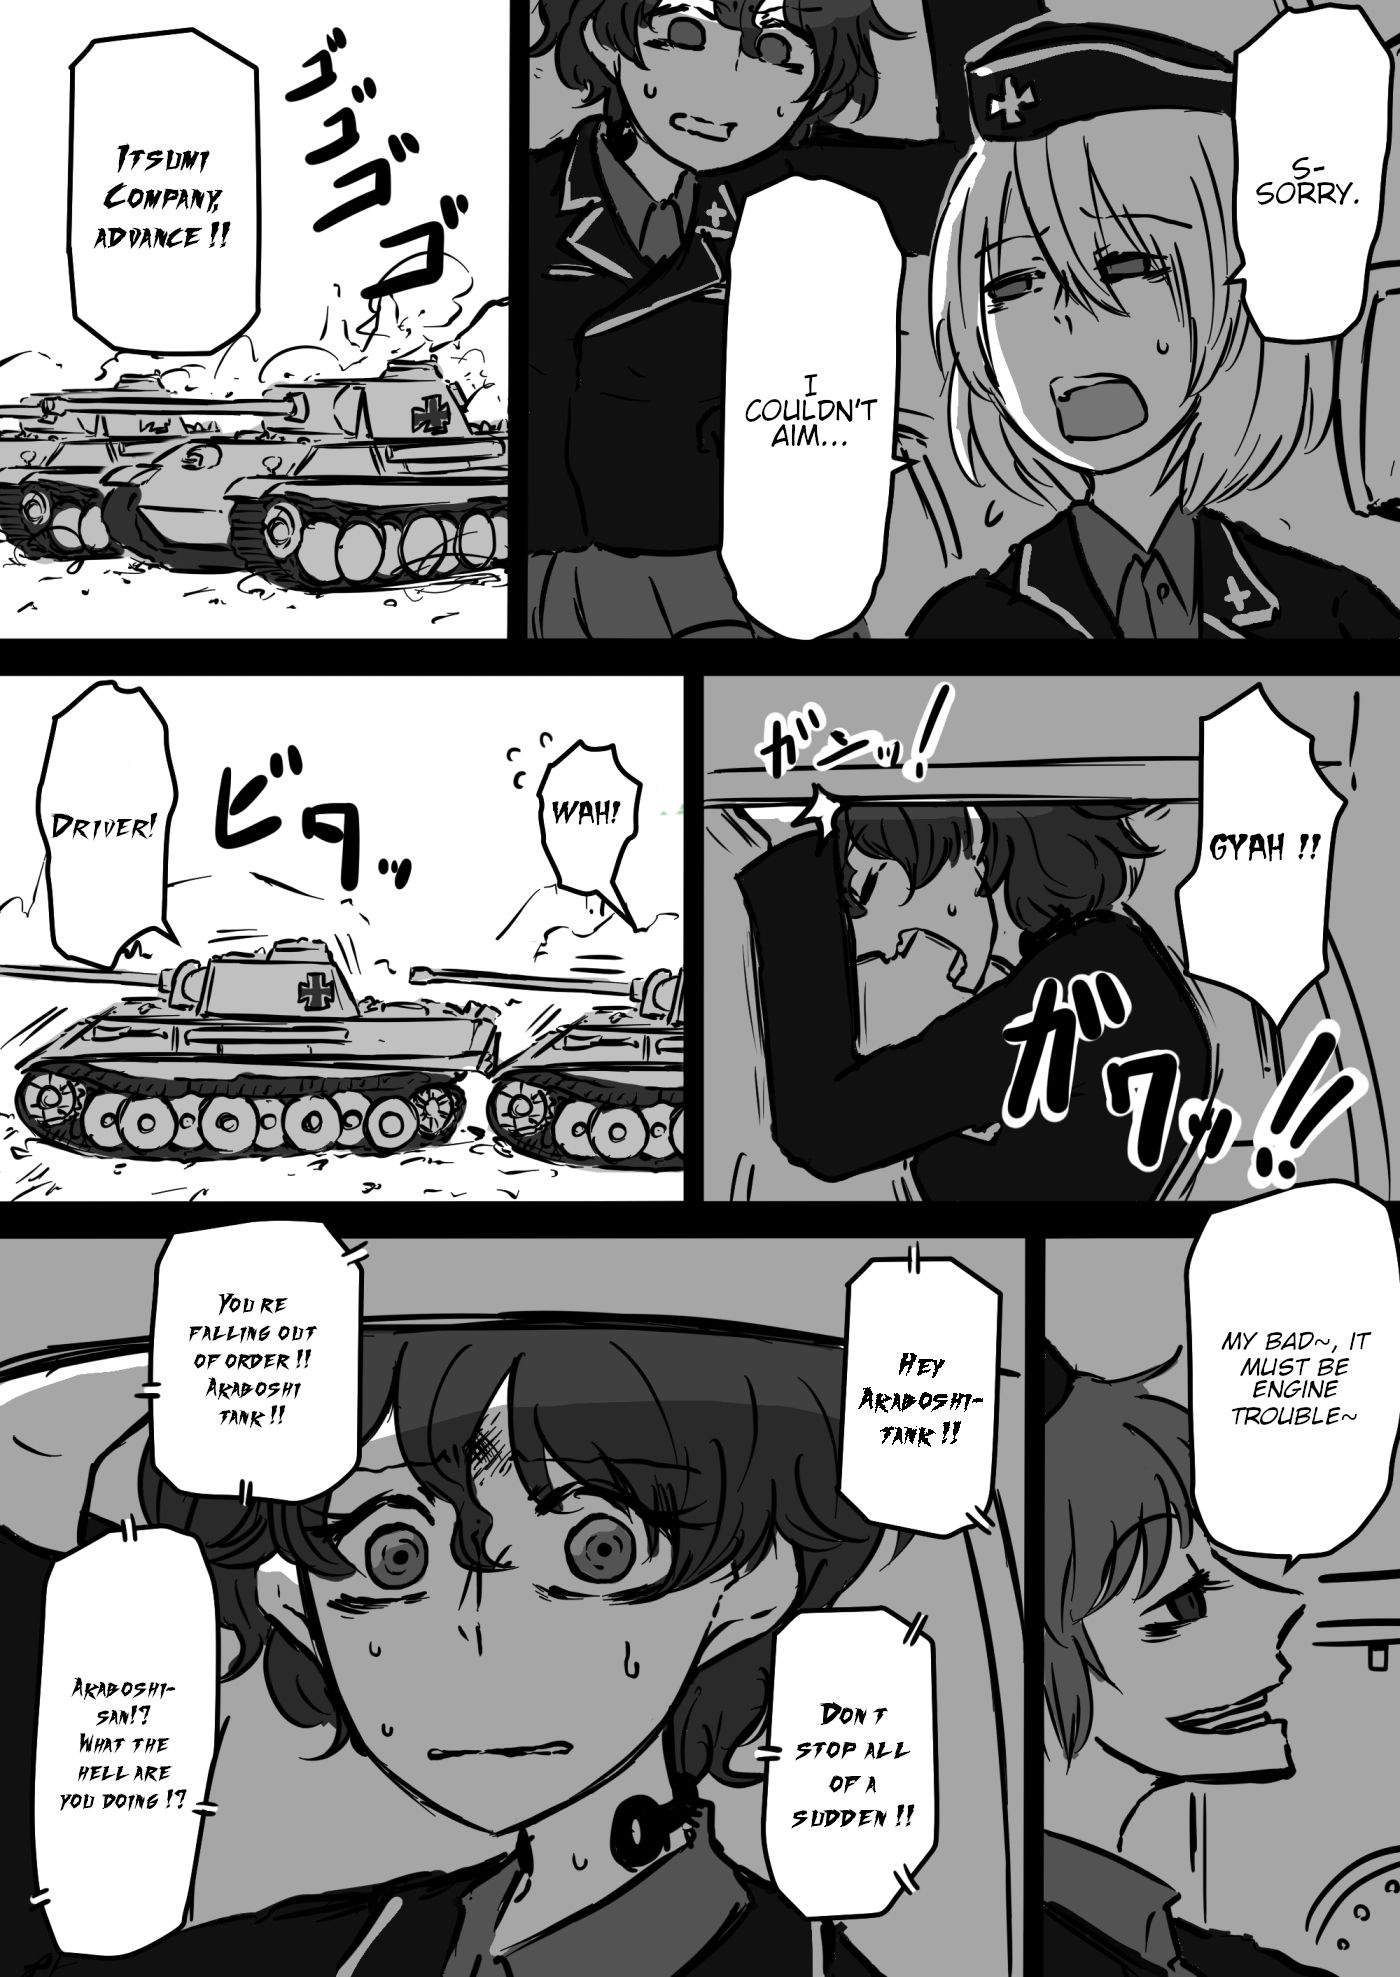 Girls und Panzer - Unofficial Story - Koume's Road - chapter 4 - #3